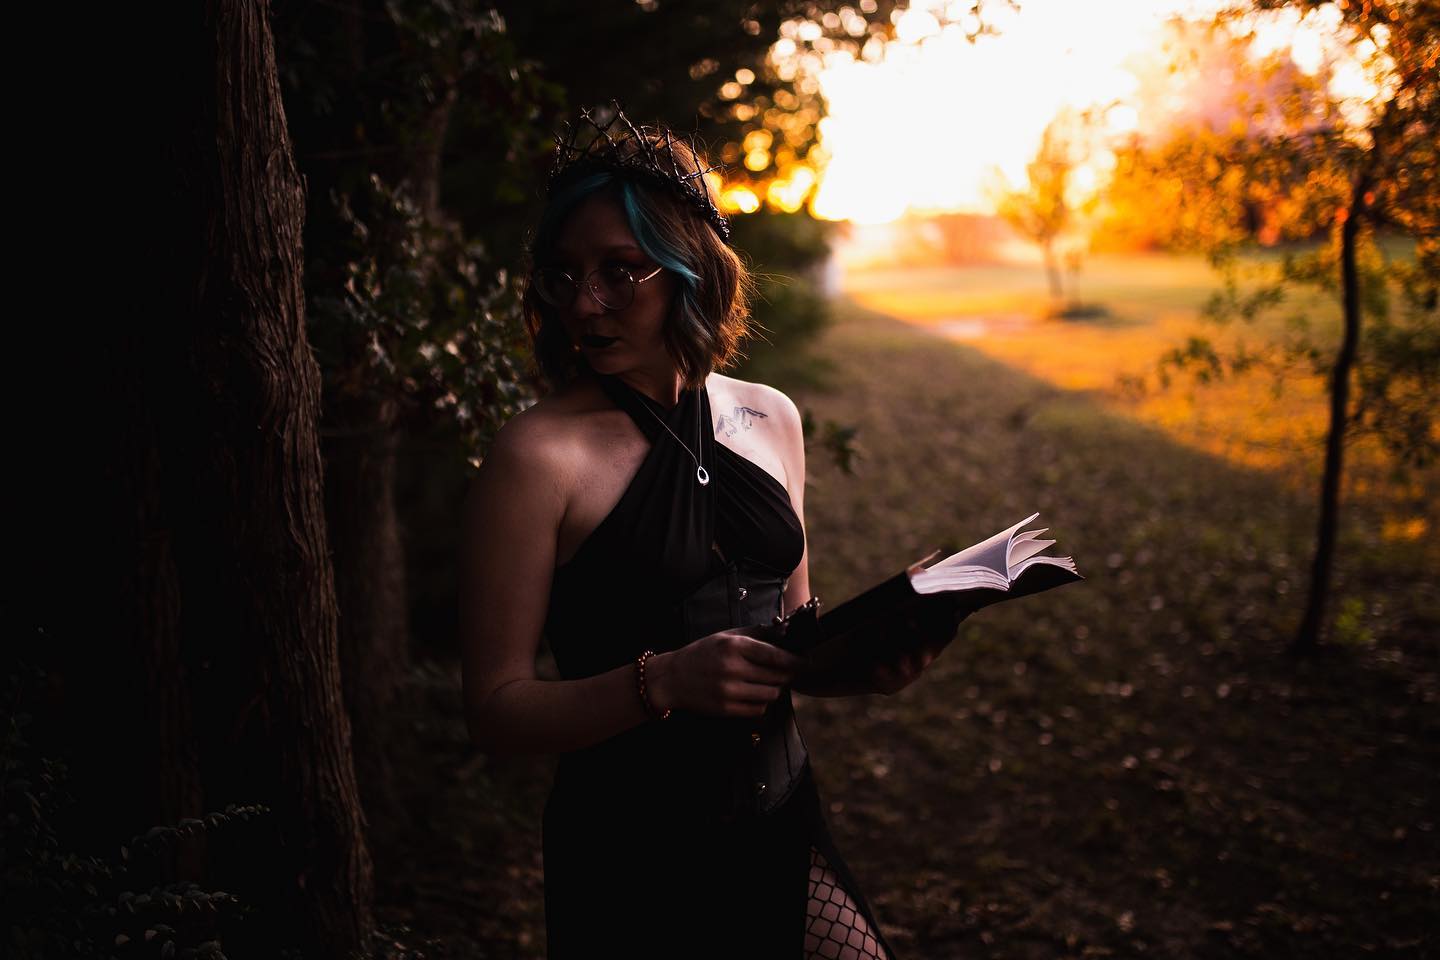 First day of October…🎃
📷: @thekrissigreer
•
•
•
#seemoreononlyfans #halloweencostume #halloweenvibes #feelingwitchy #yearroundwitch #onlyfansbabe #onlyfansgirl #halloween #sunsetphotography #feelingmyself #thekrissigreer2021 #thekrissigreer #witchplease #witchphotoshoot #girlswithglasses #witchyboudoir